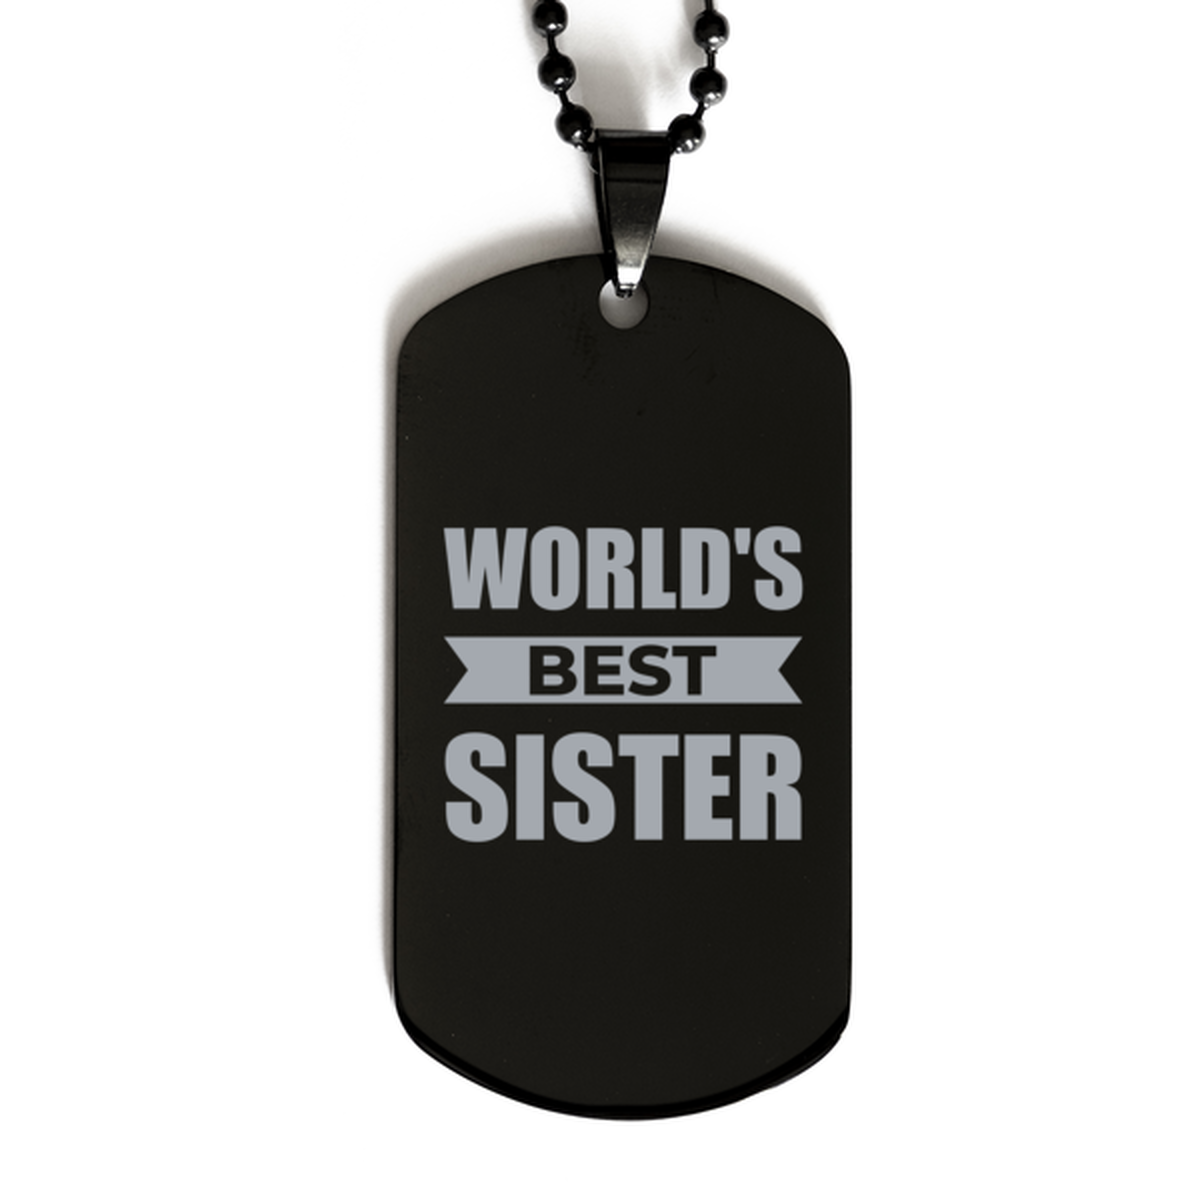 Worlds Best Sister Gifts, Funny Black Engraved Dog Tag For Sister, Birthday Presents For Women